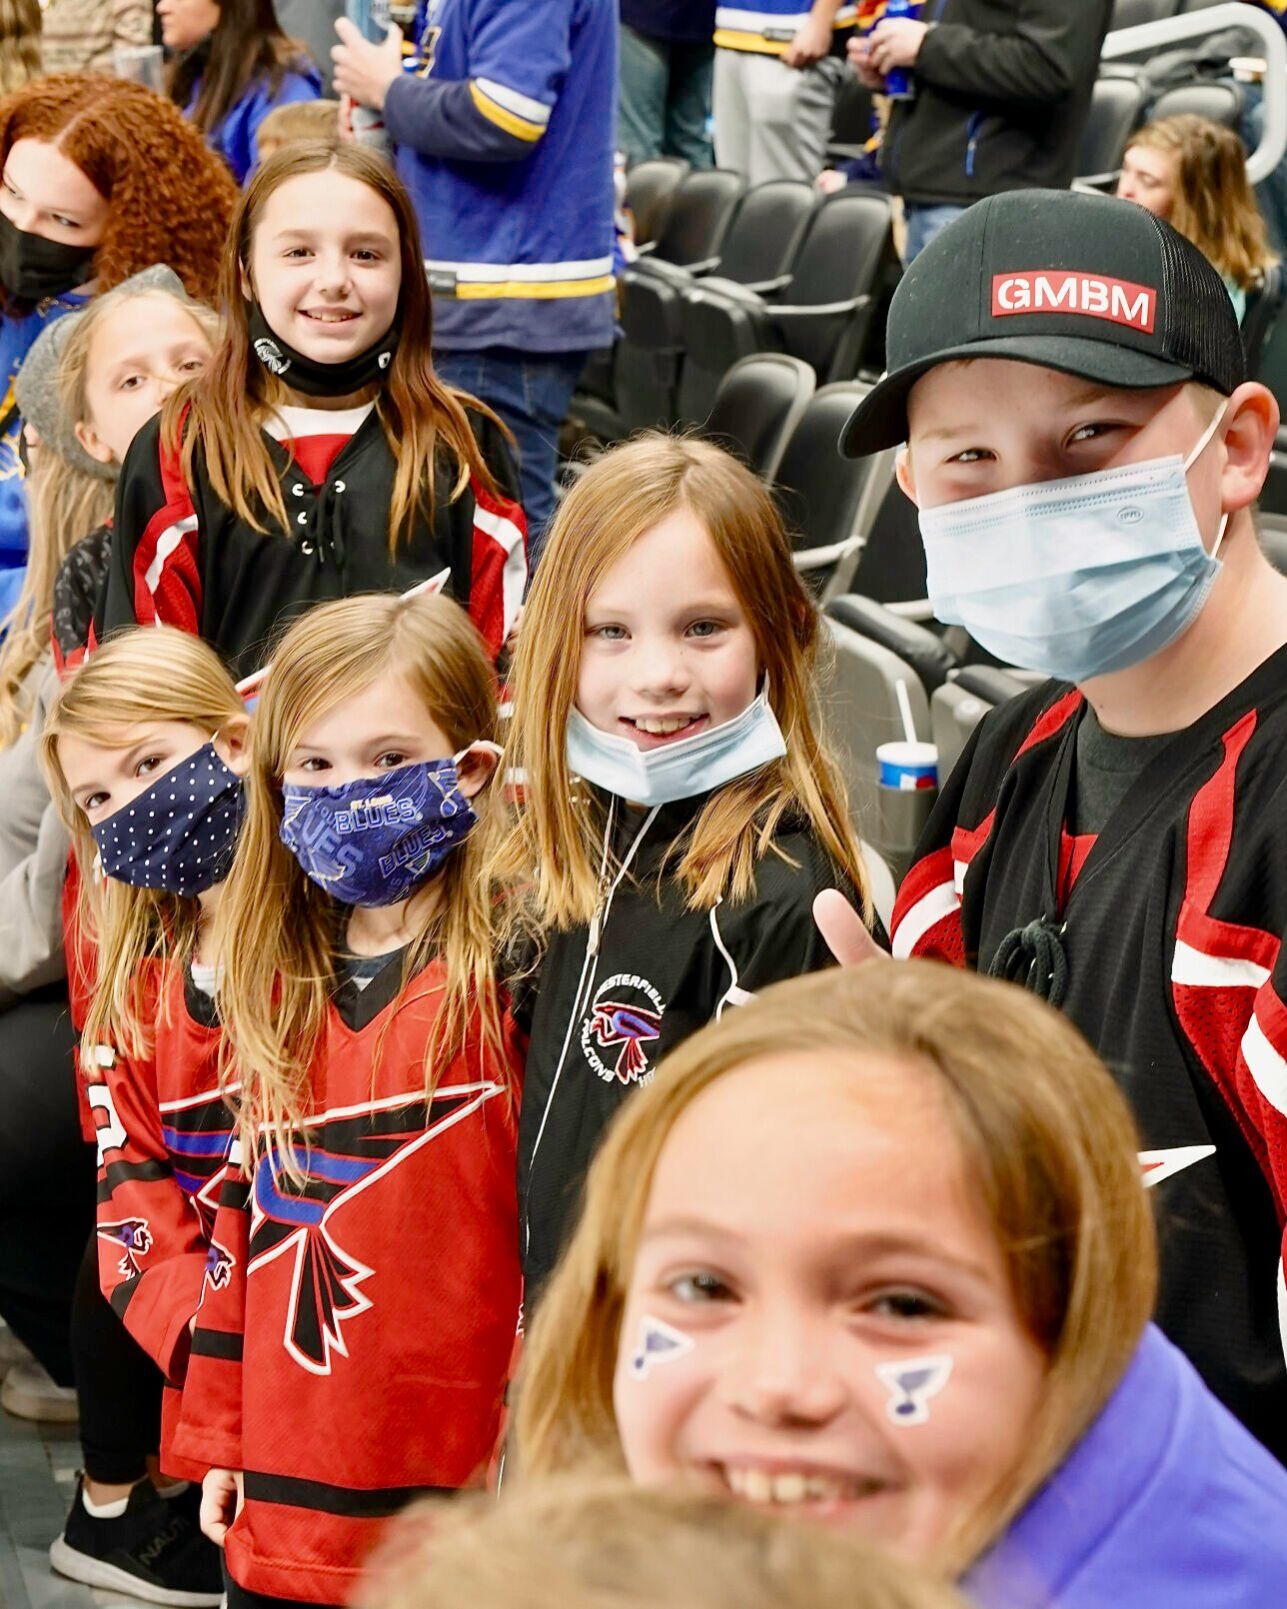 21.11.14 Chesterfield Falcons Girls Hockey at Blues Game - 2.jpeg